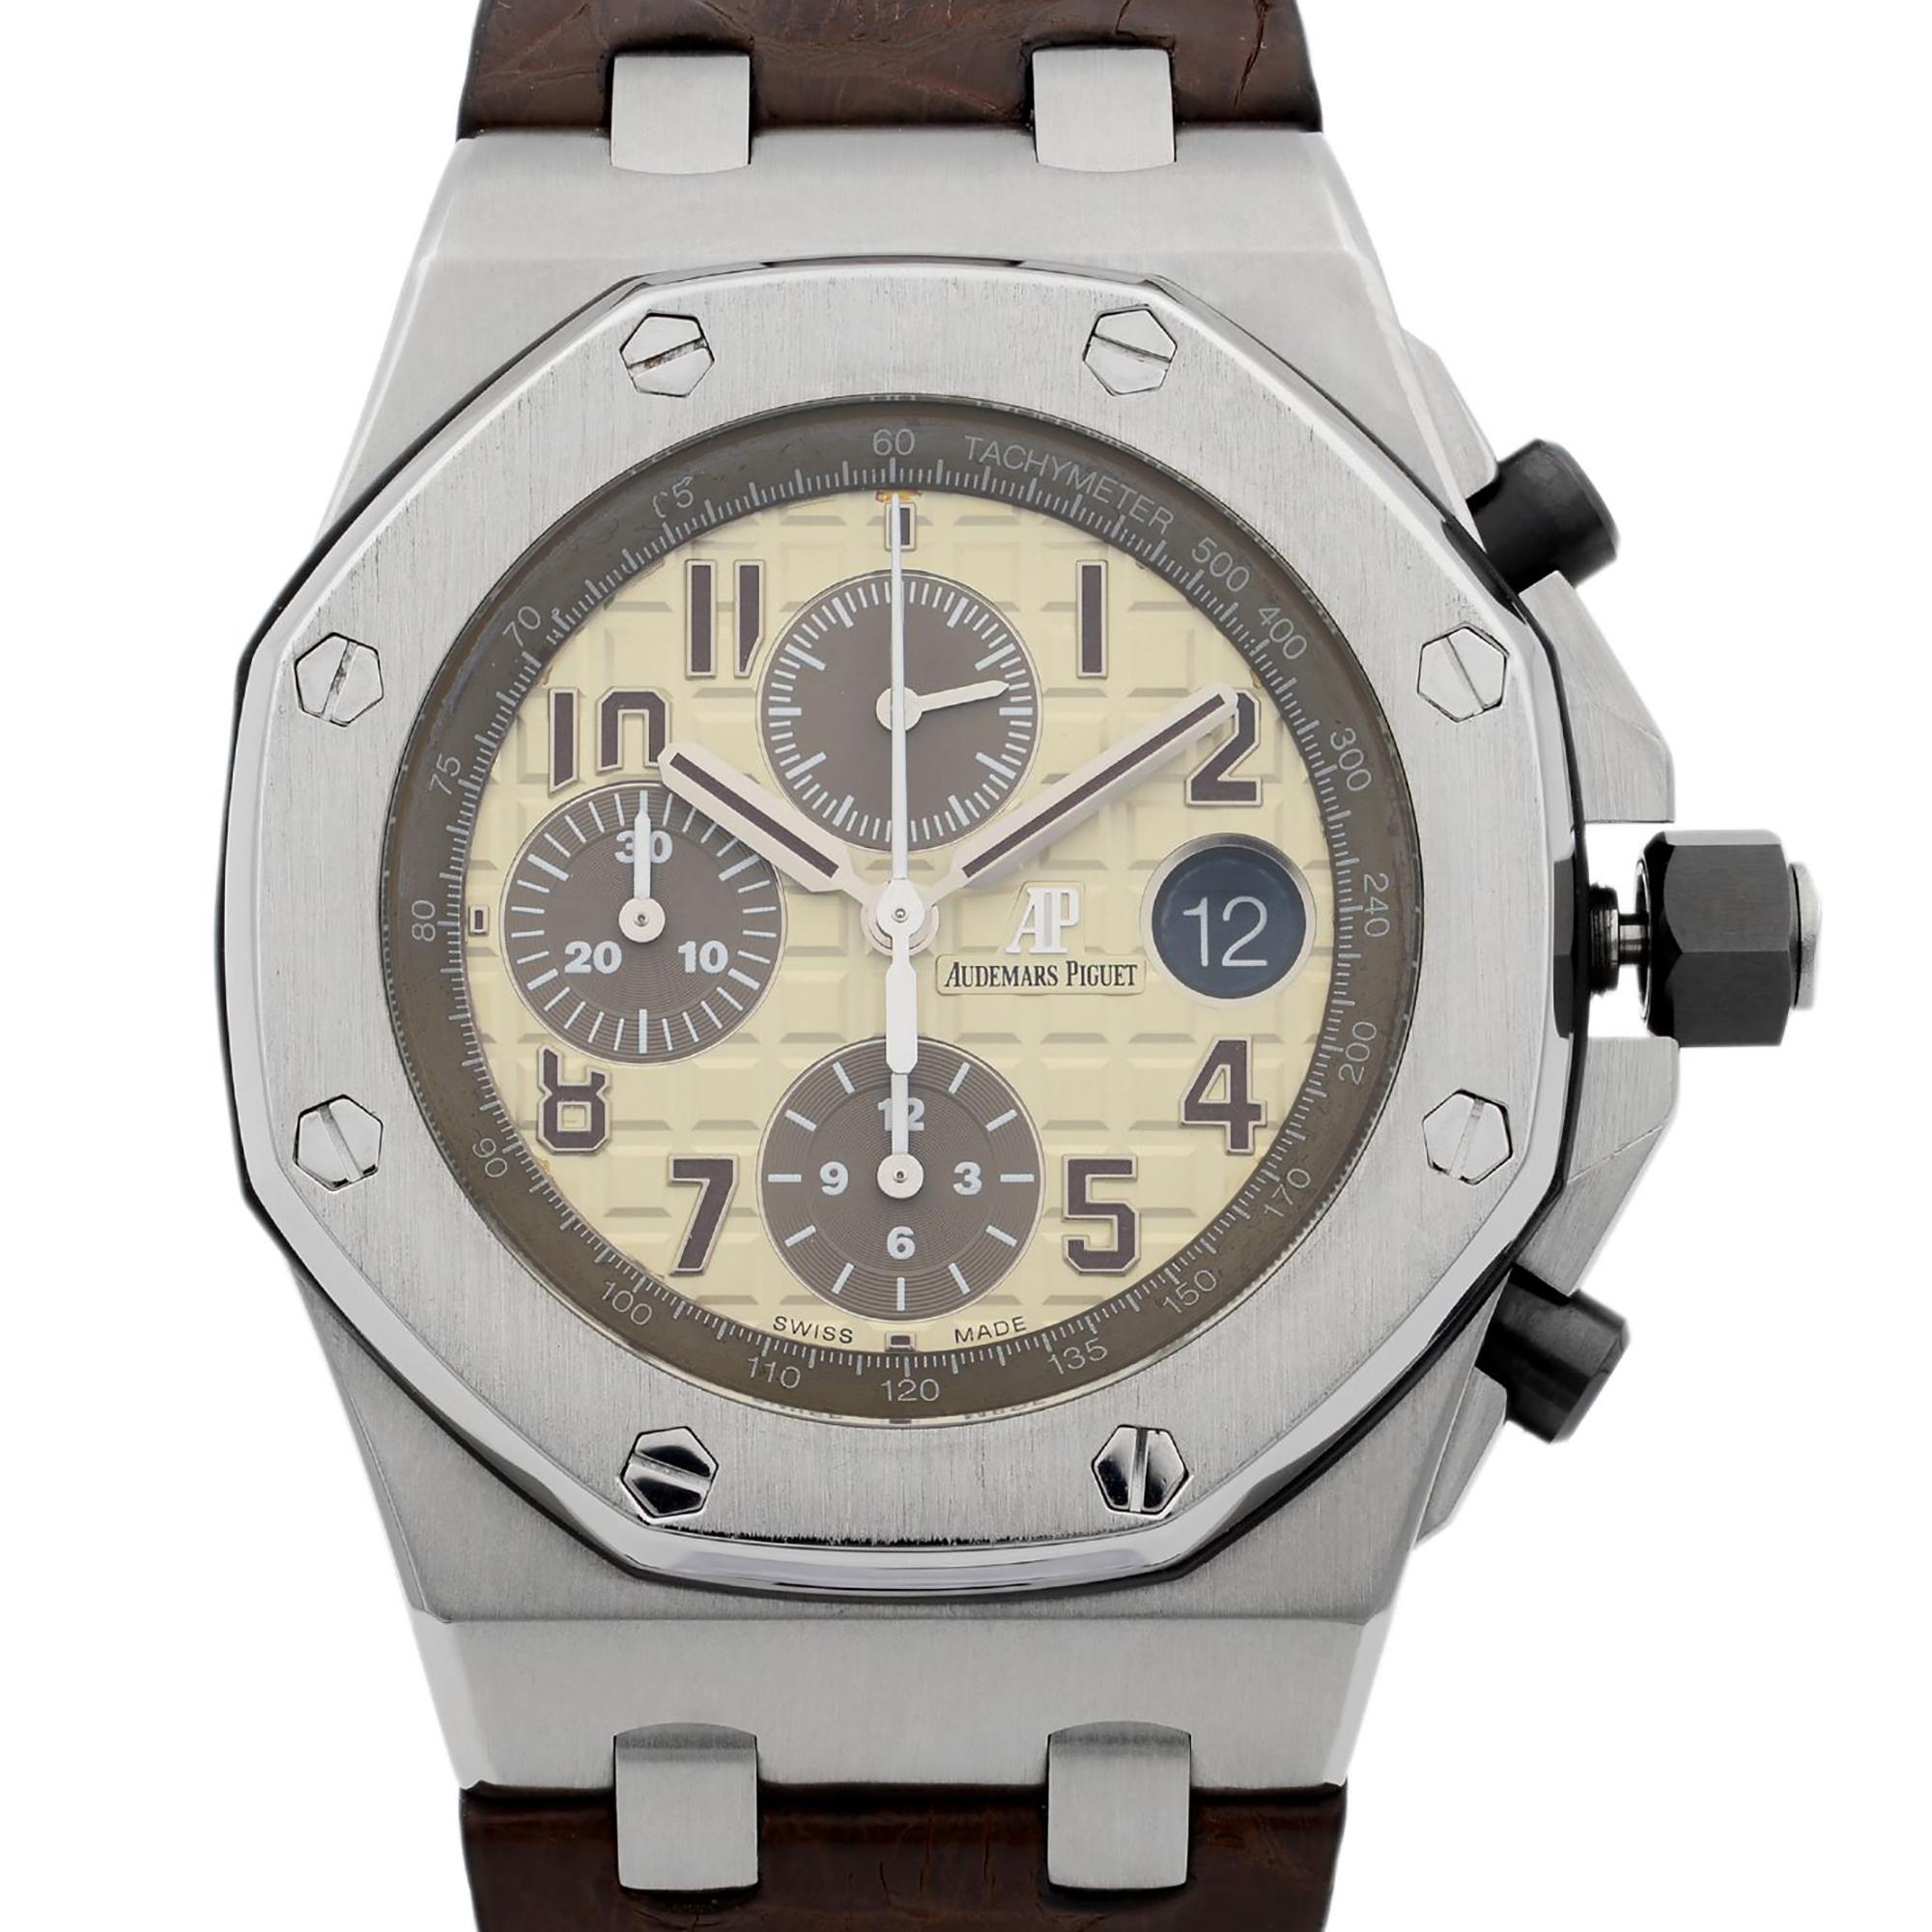 Pre-owned Audemars Piguet Royal Oak Offshore Safari Steel Off-White Watch 26470ST.OO.A801CR.01. This Beautiful Timepiece is Powered by Mechanical (Automatic) Movement And Features: Octagon Stainless Steel Case with a Brown Leather Strap. Fixed